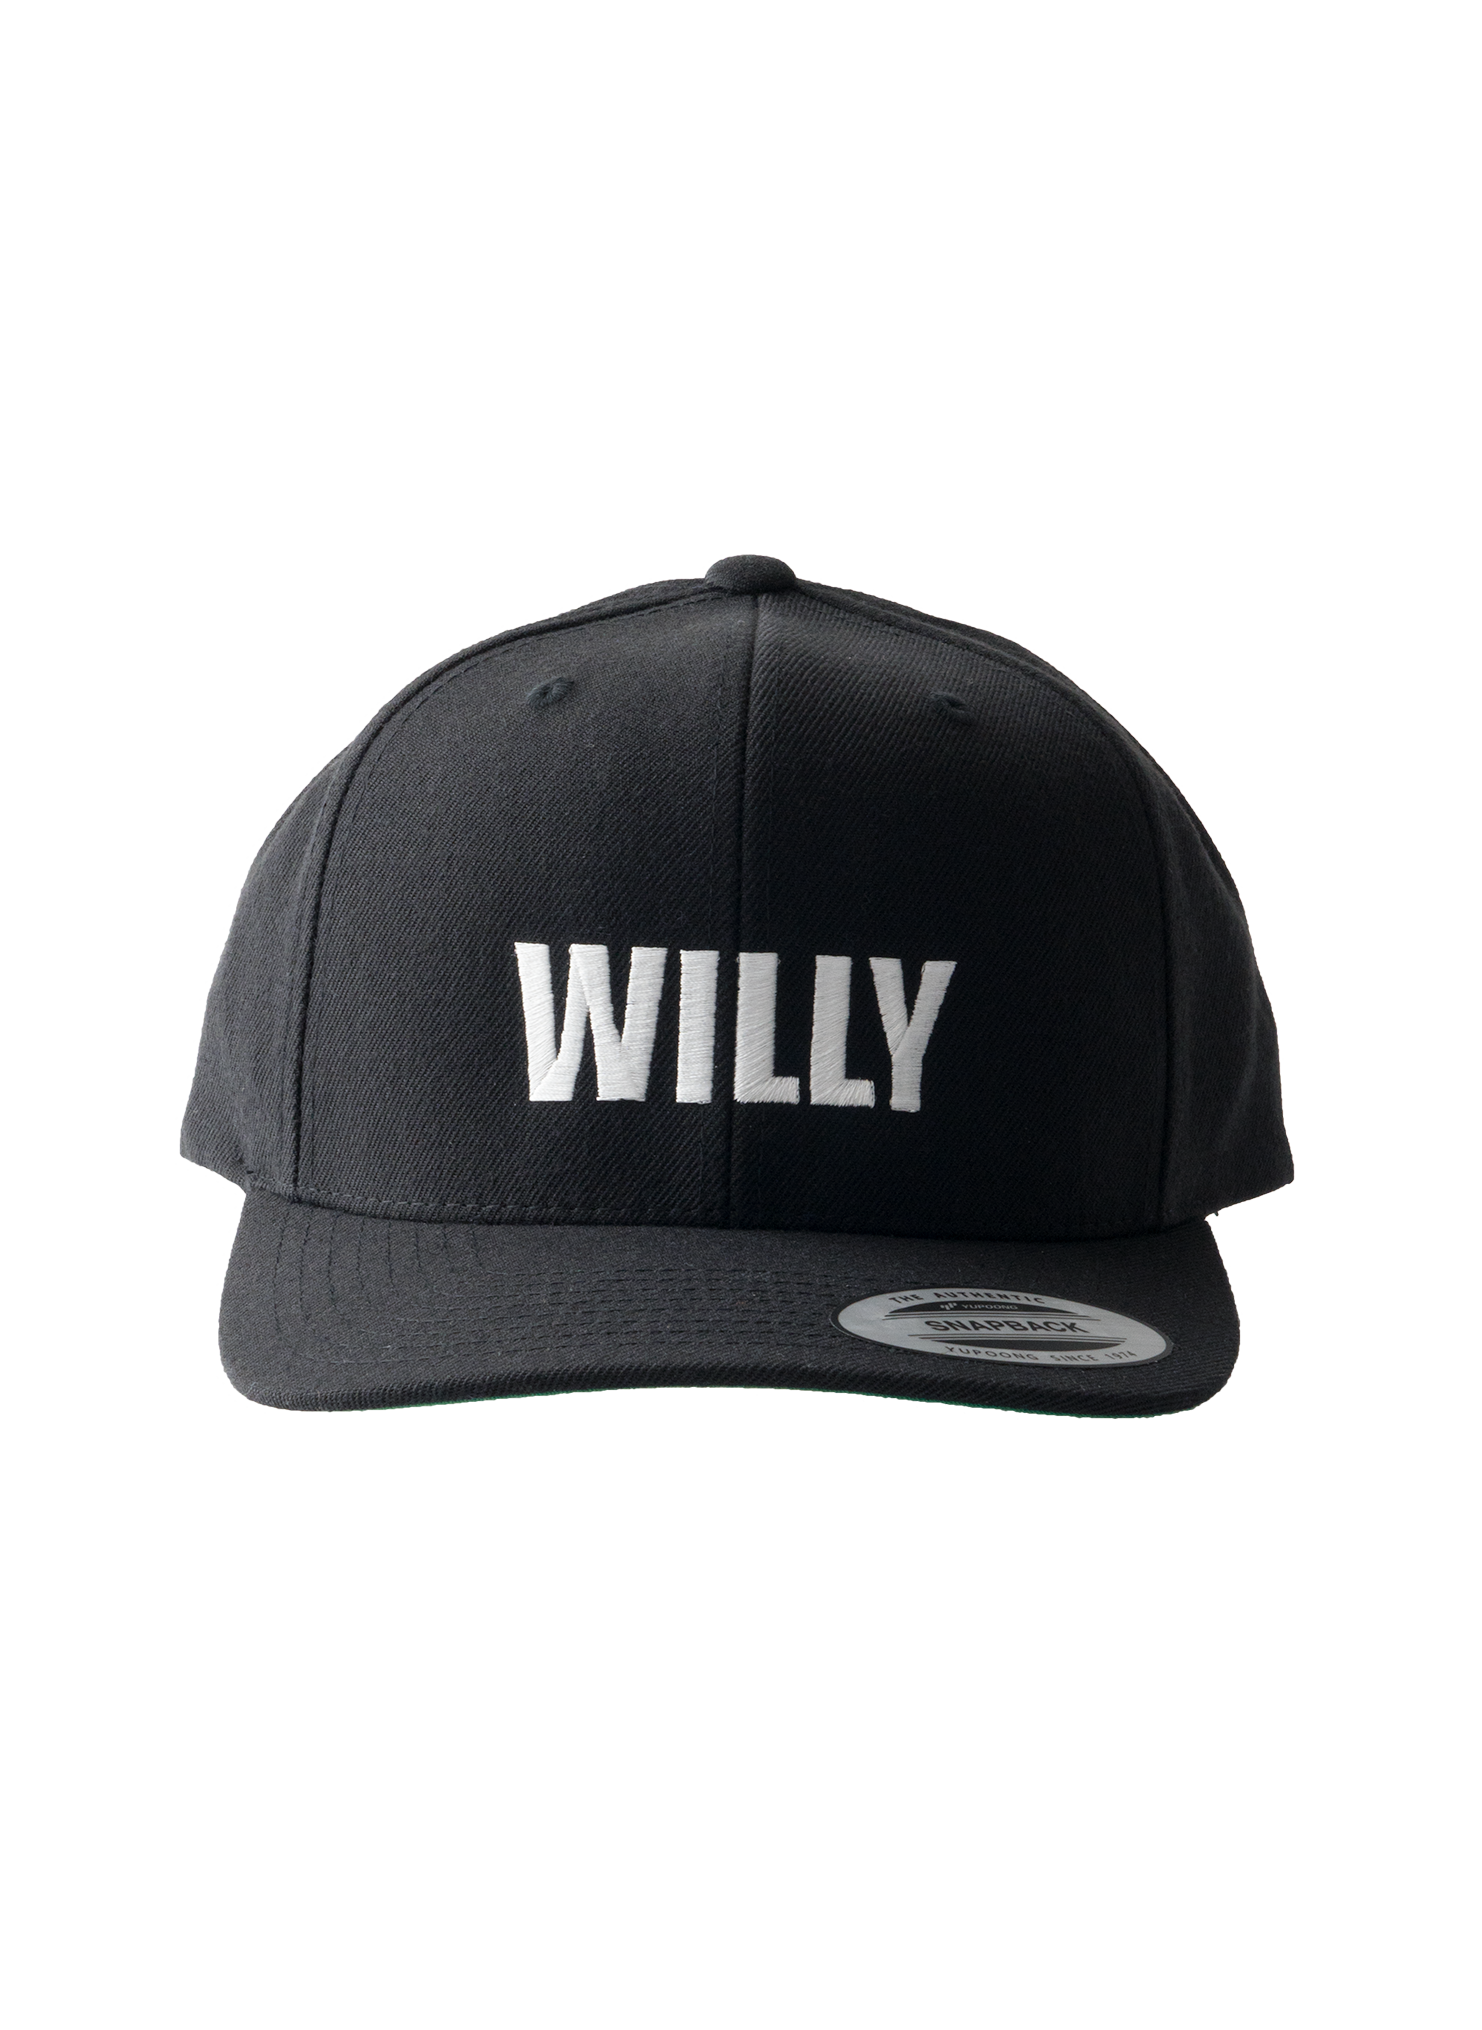 WC Willy Ball Cap Black - NOW OR NEVER